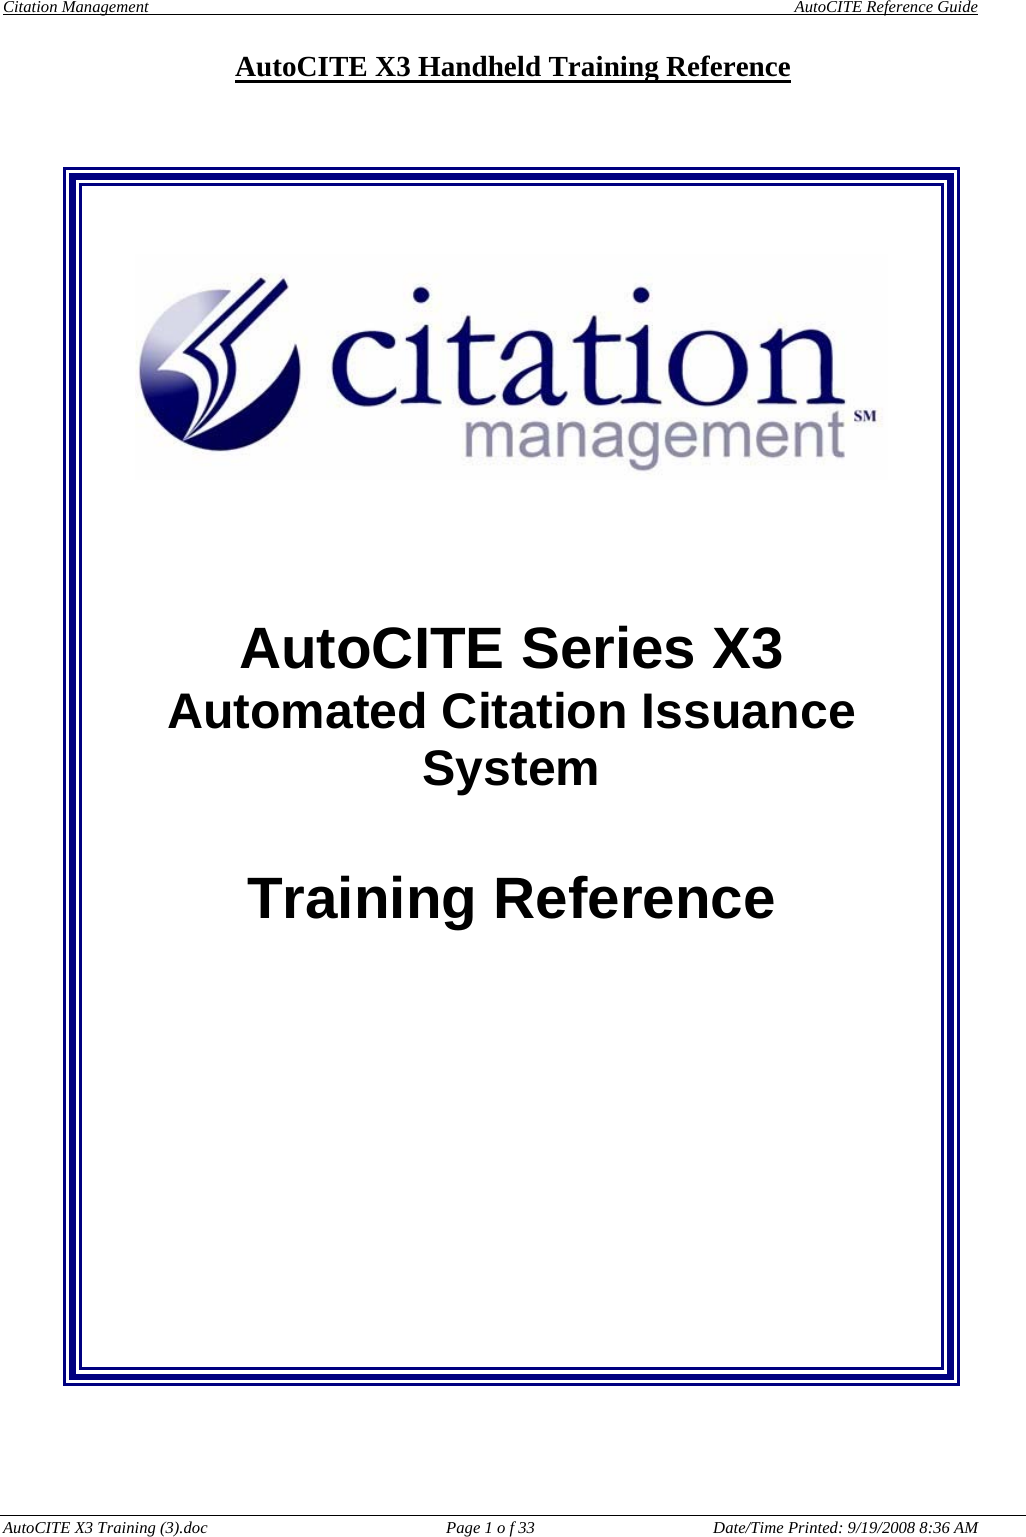 Citation Management    AutoCITE Reference Guide  AutoCITE X3 Handheld Training Reference AutoCITE X3 Training (3).doc  Page 1 o f 33  Date/Time Printed: 9/19/2008 8:36 AM       AutoCITE Series X3 Automated Citation Issuance System  Training Reference     